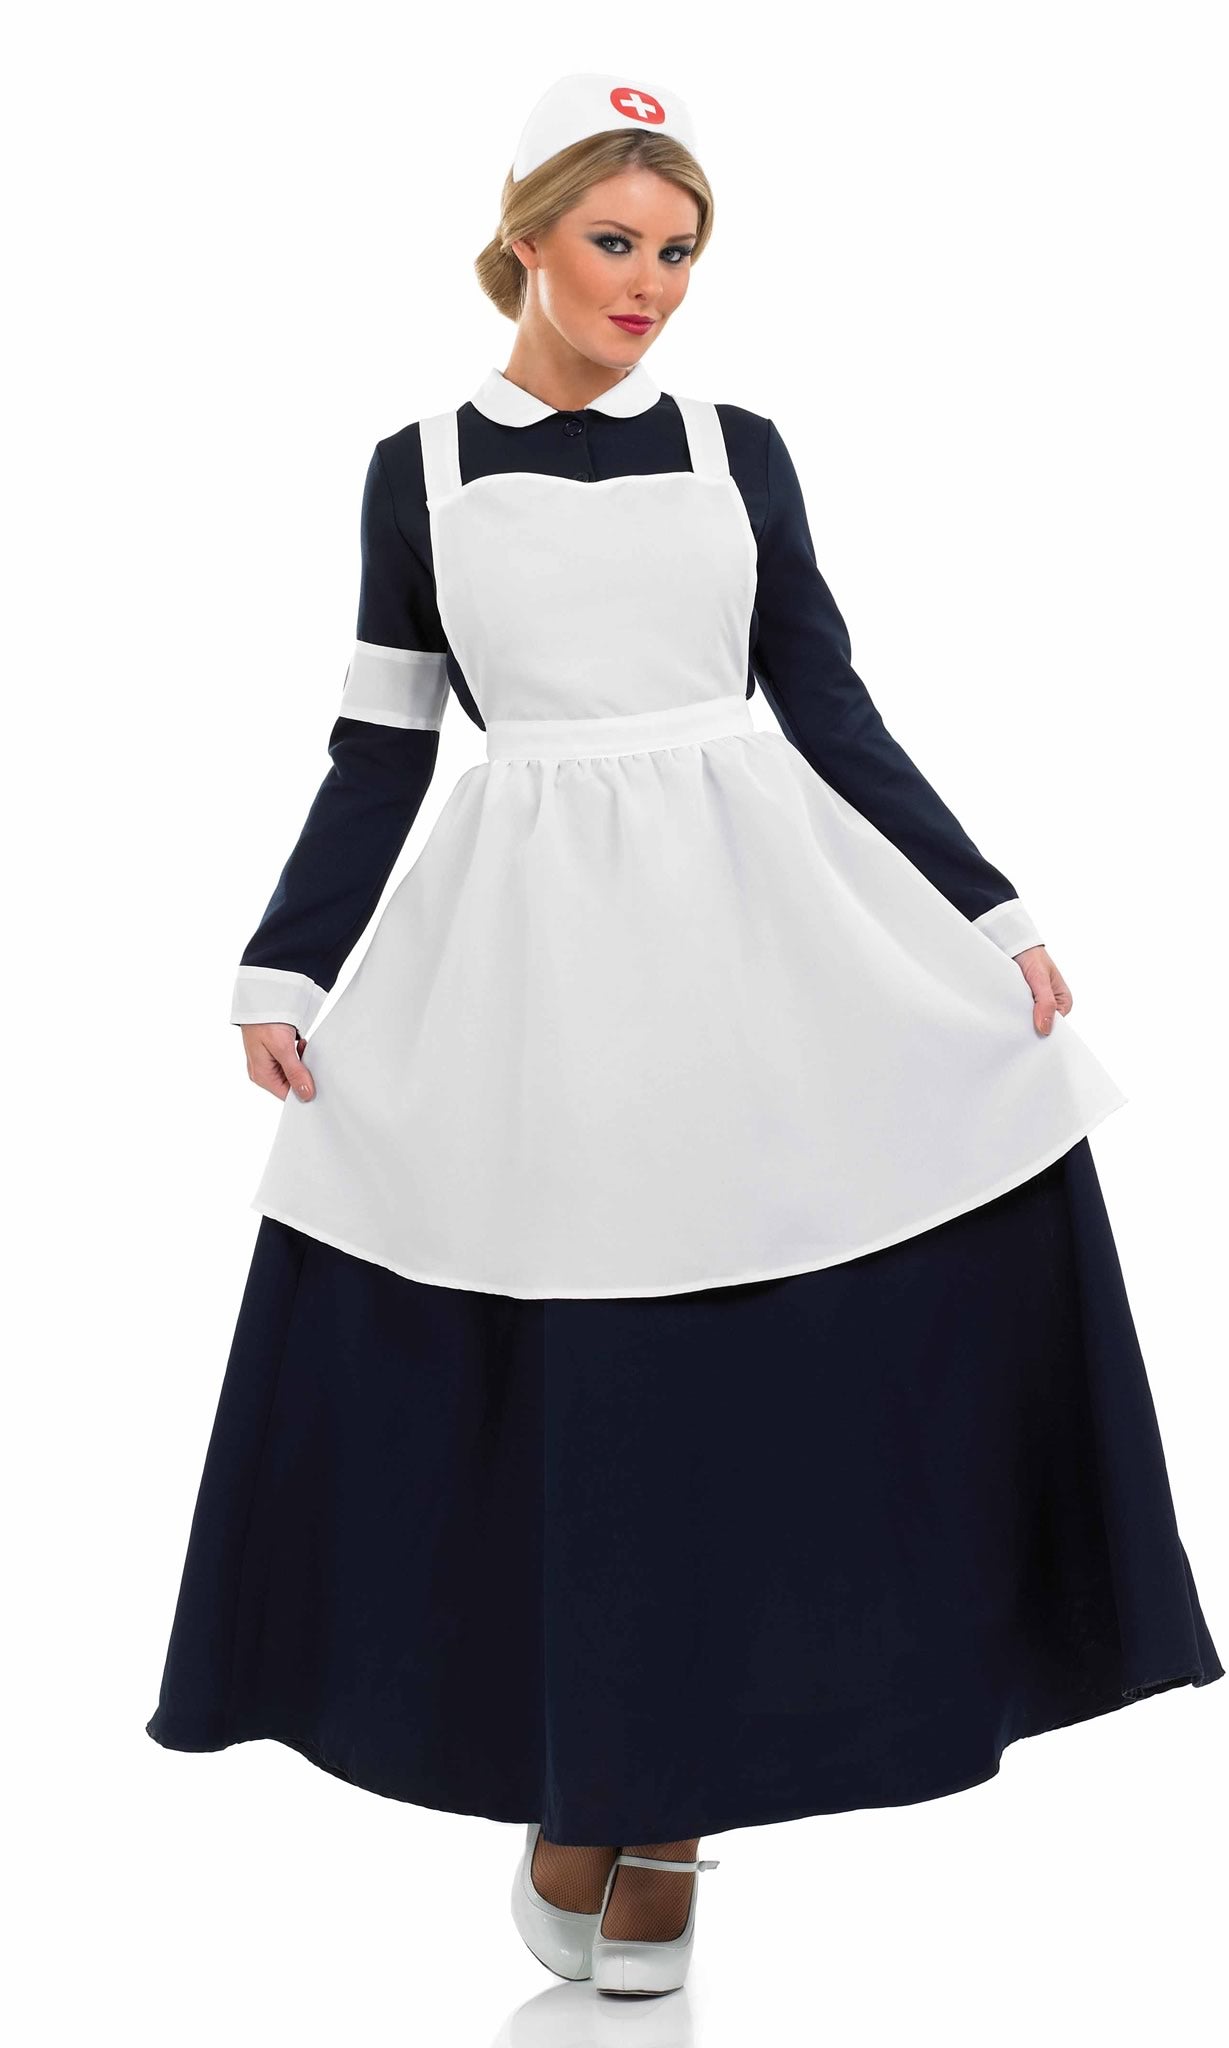 Long Victorian nurse dress with white hat and apron